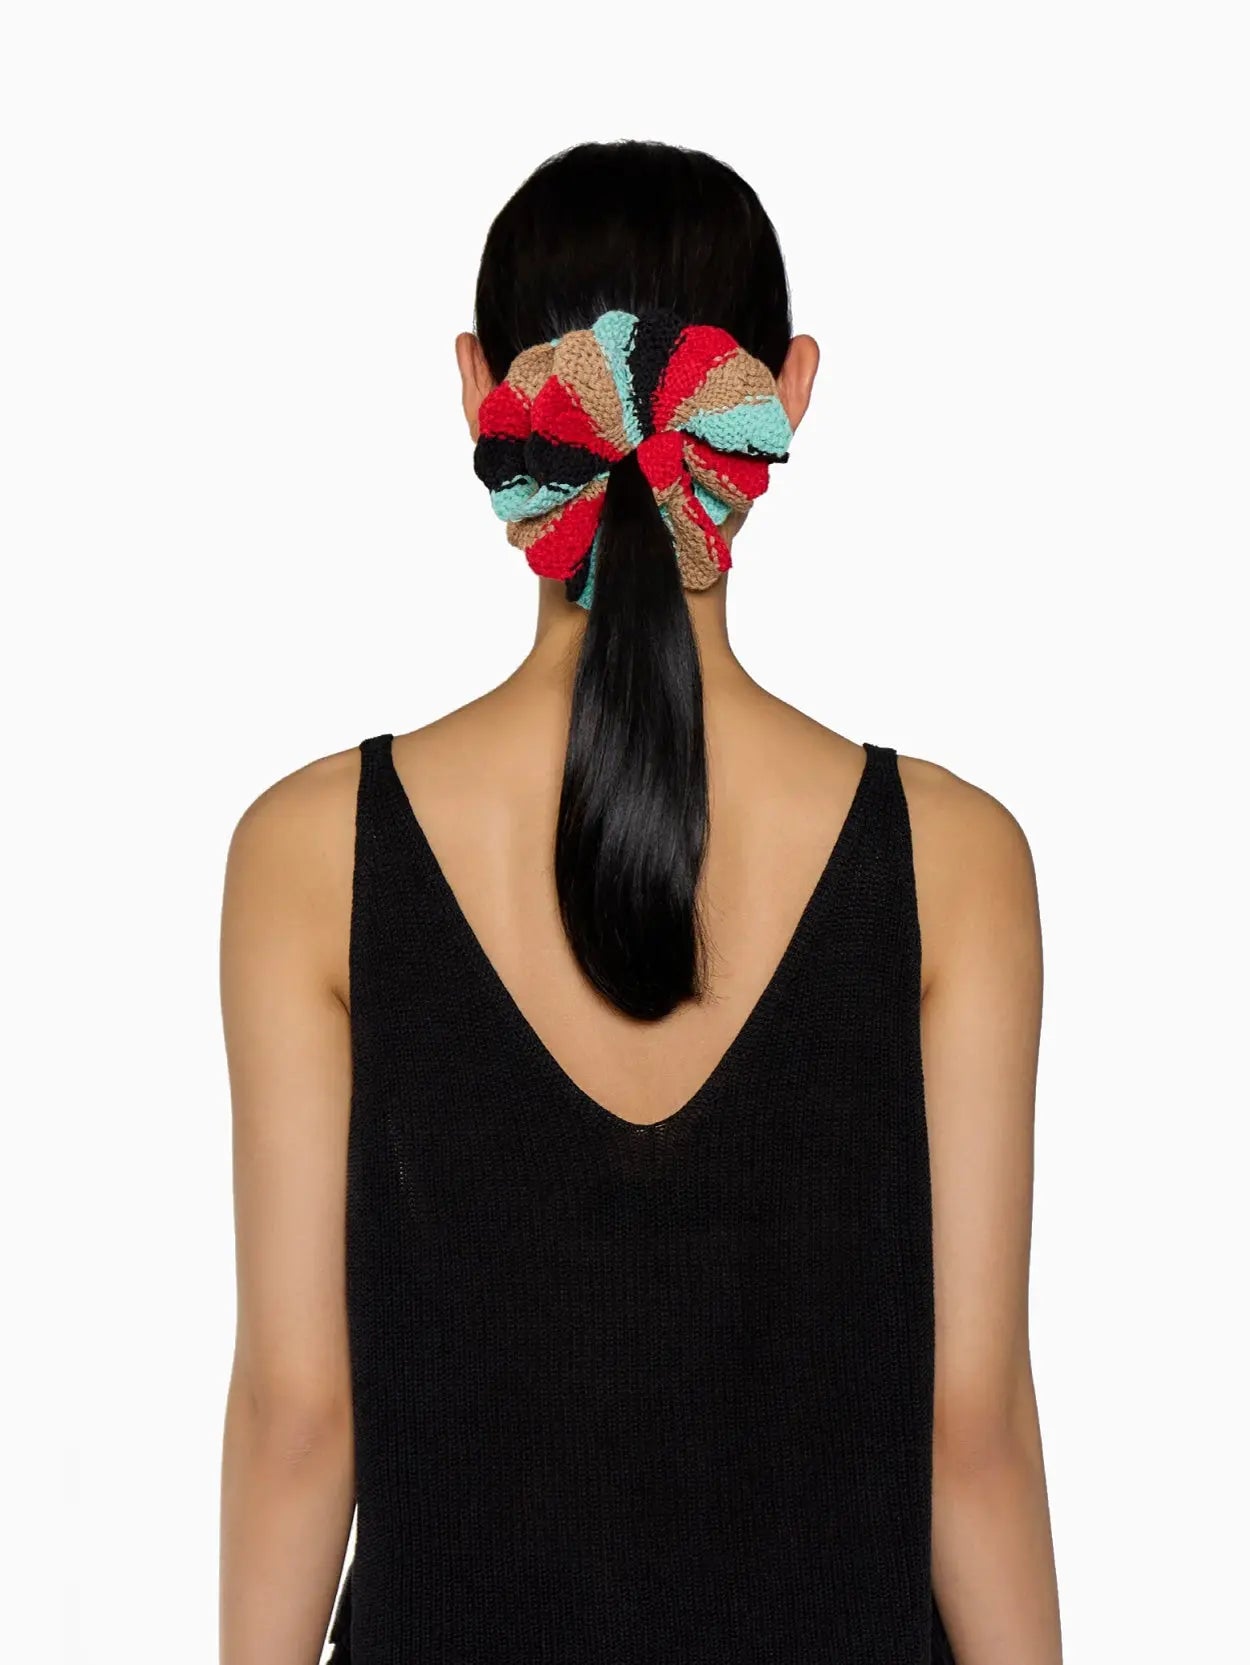 A multicolored, crocheted Fernandita Scrunchie Berber made up of alternating segments in red, black, blue, and beige. It is circular and has a visible fabric brand tag labeled "Tomasa." Available at bassalstore in Barcelona. The background is plain white.